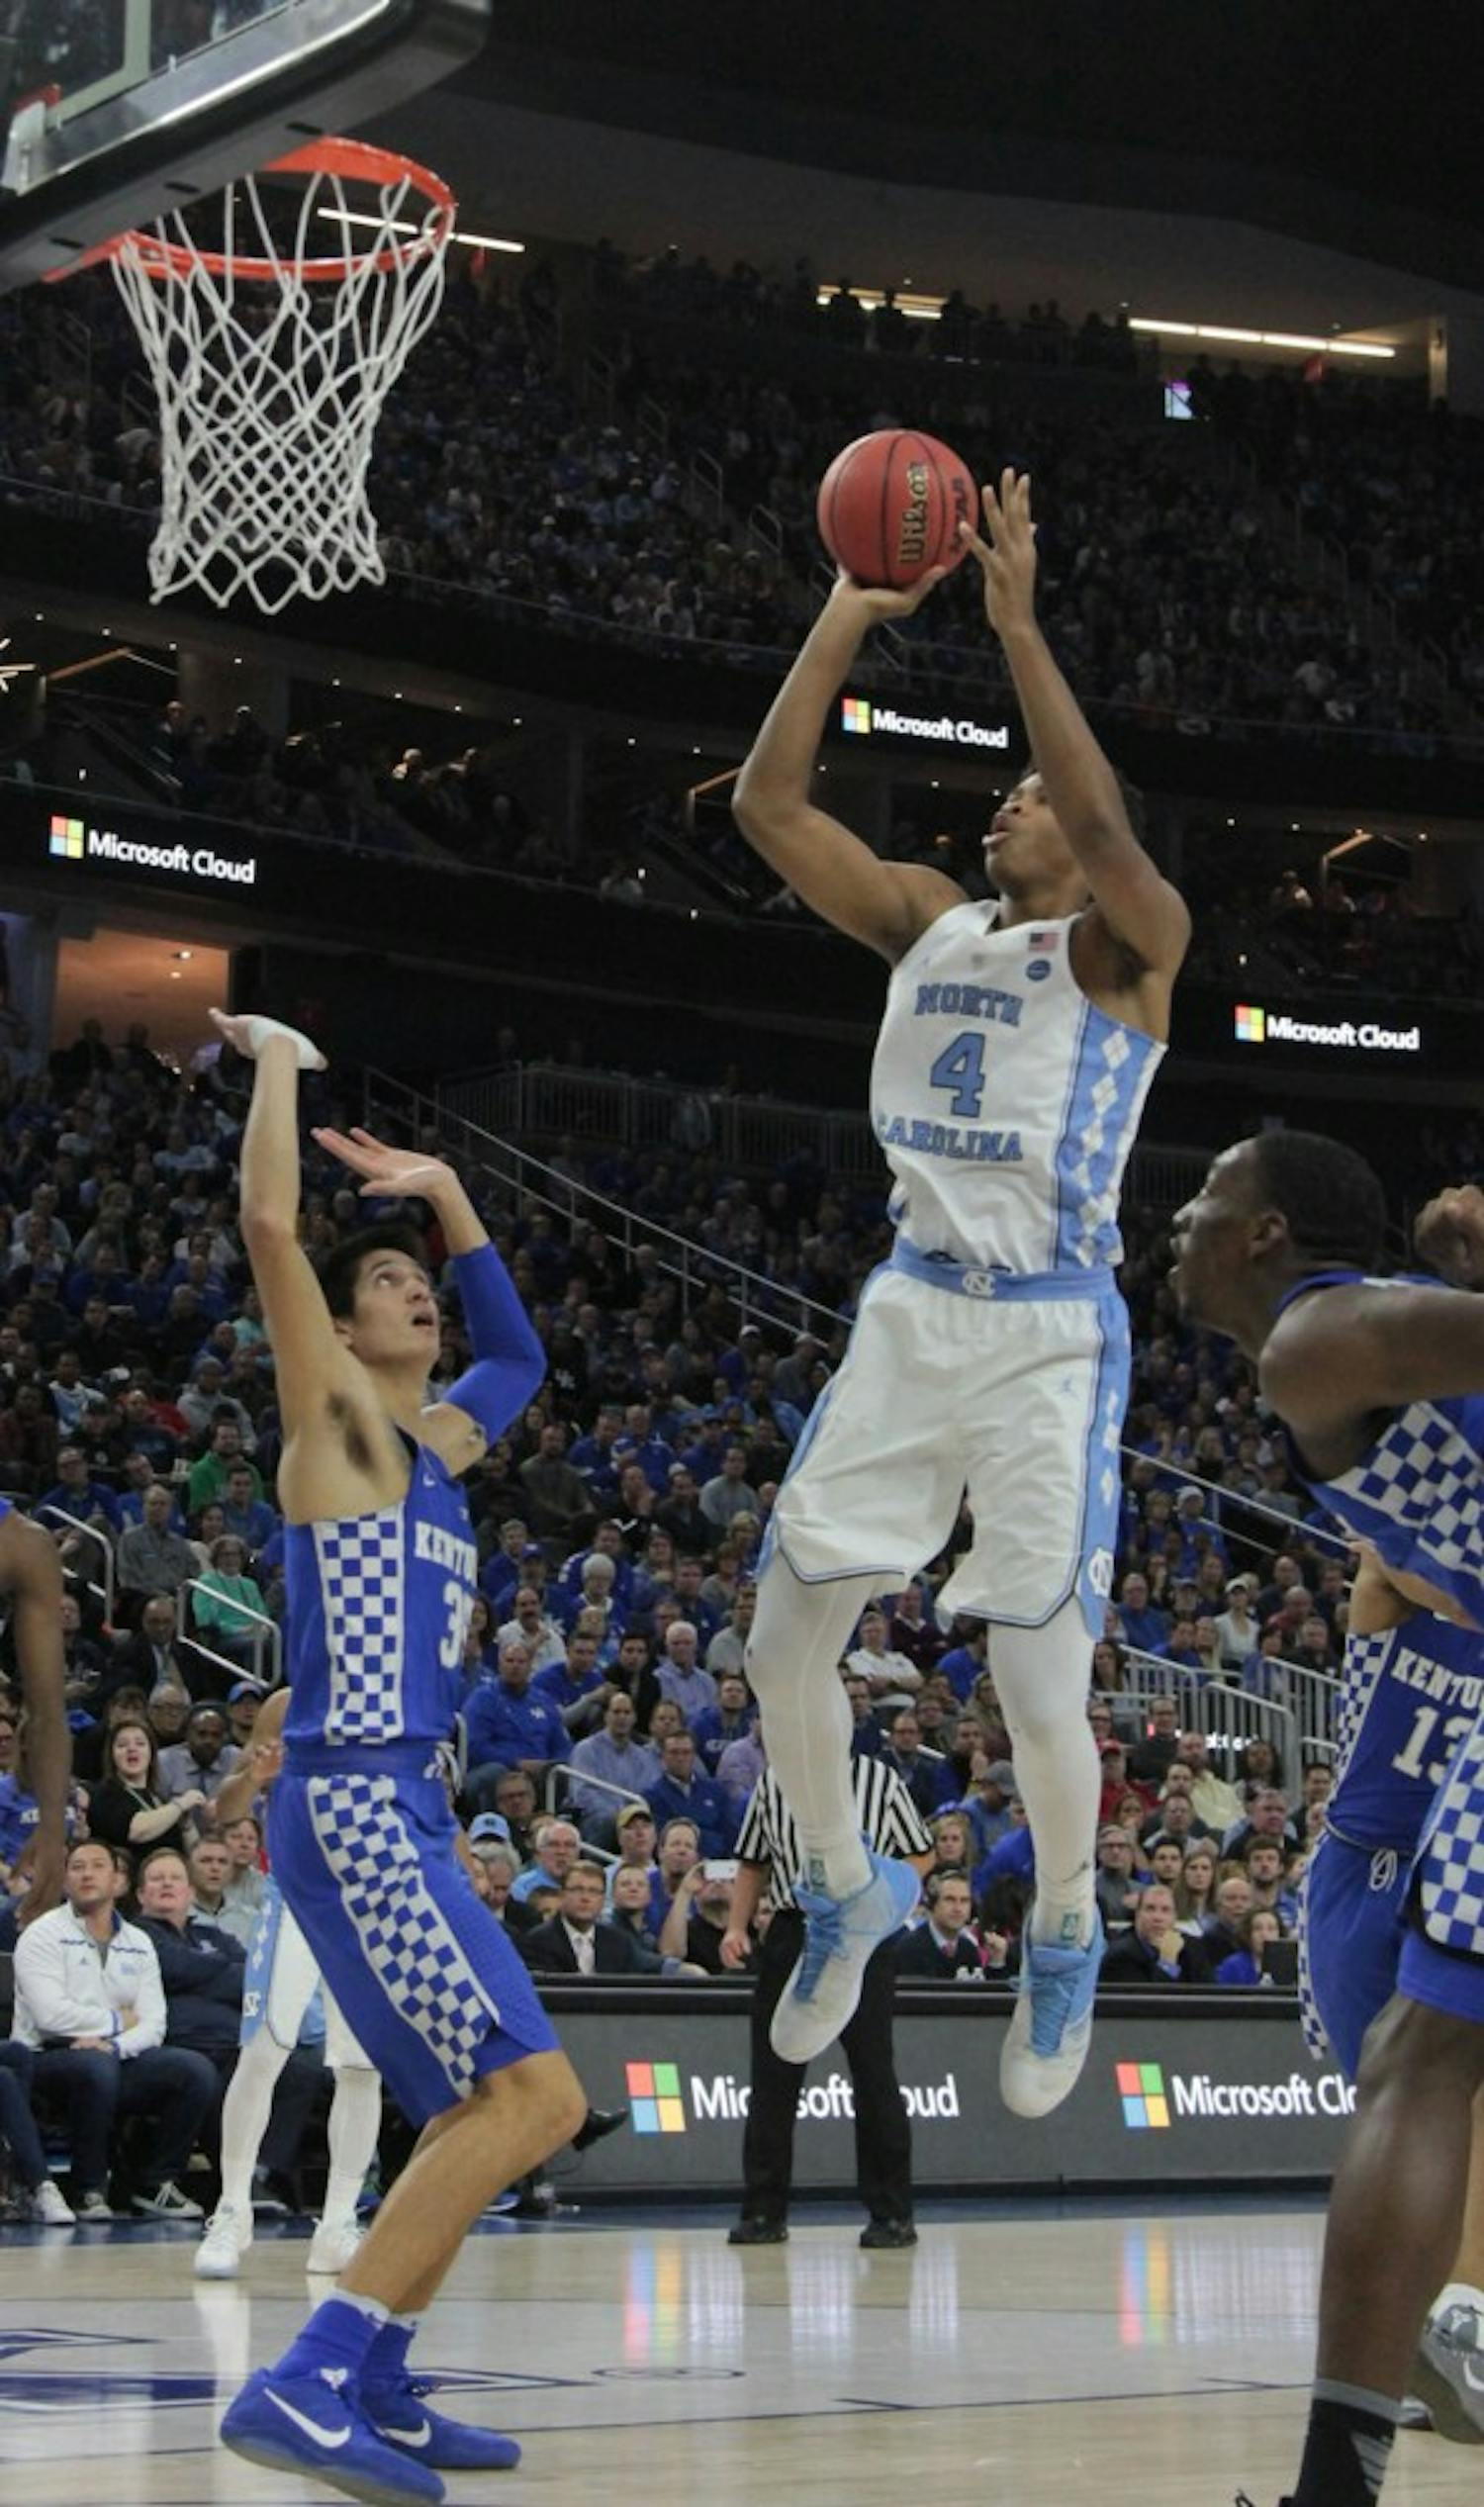 UNC forward Isaiah Hicks (4) goes for a contested shot against Kentucky at the CBS Sports Classic on Saturday.